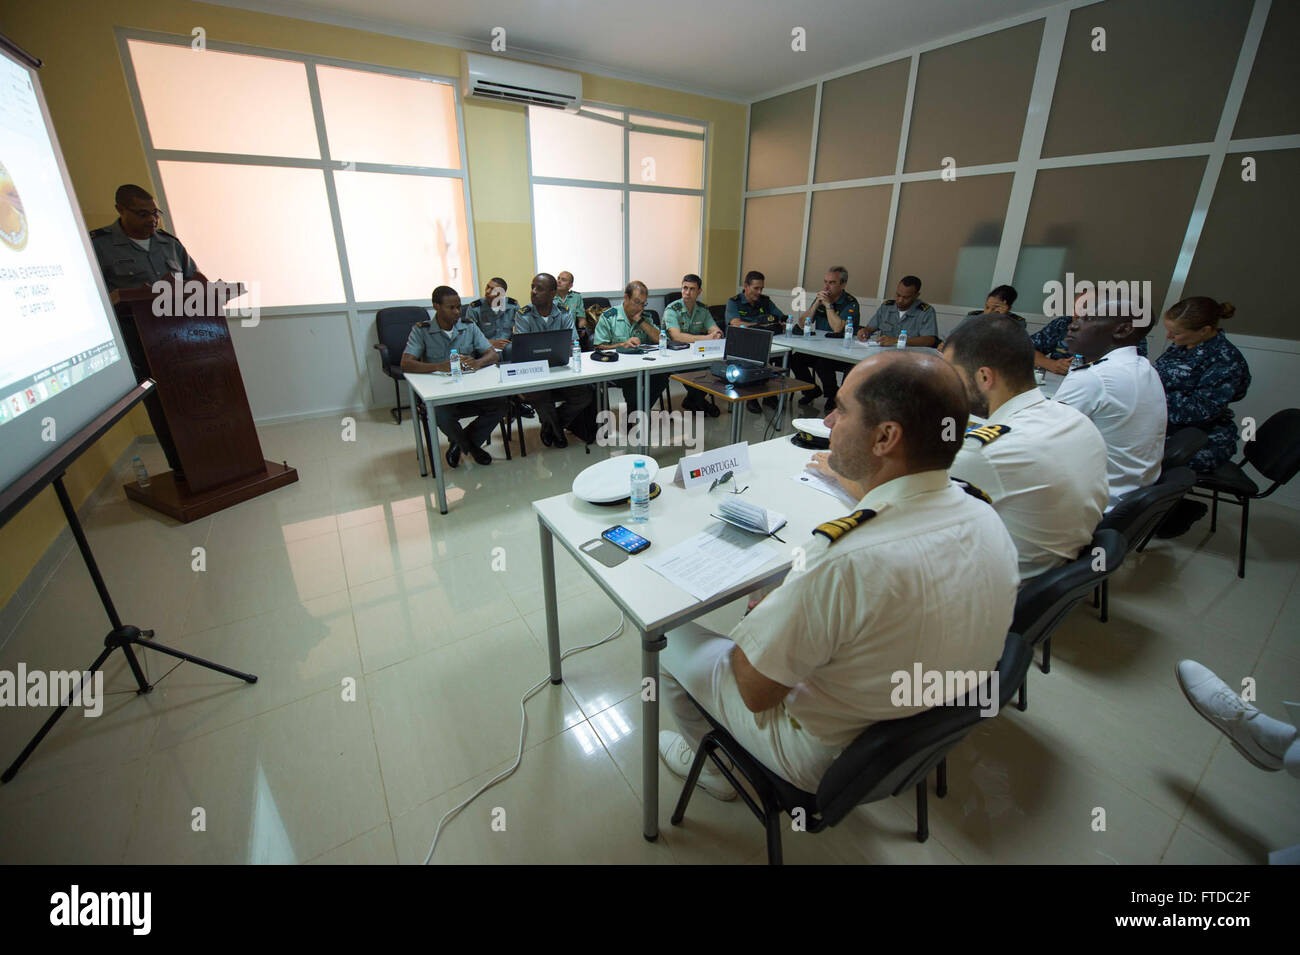 150427-N-TC720-026 MINDELO, Cabo Verde (April 27, 2015) Maritime forces from Spain, Cabo Verde, Senegal, Portugal and the United States conduct a closing brief in Mindelo, Cabo Verde, which concluded Exercise Saharan Express 2015, April 27. Saharan Express is a U.S. Africa Command-sponsored multinational maritime exercise designed to increase maritime safety and security in the waters of West Africa. (U.S. Navy photo by Mass Communication Specialist 3rd Class Mat Murch/Released) Stock Photo